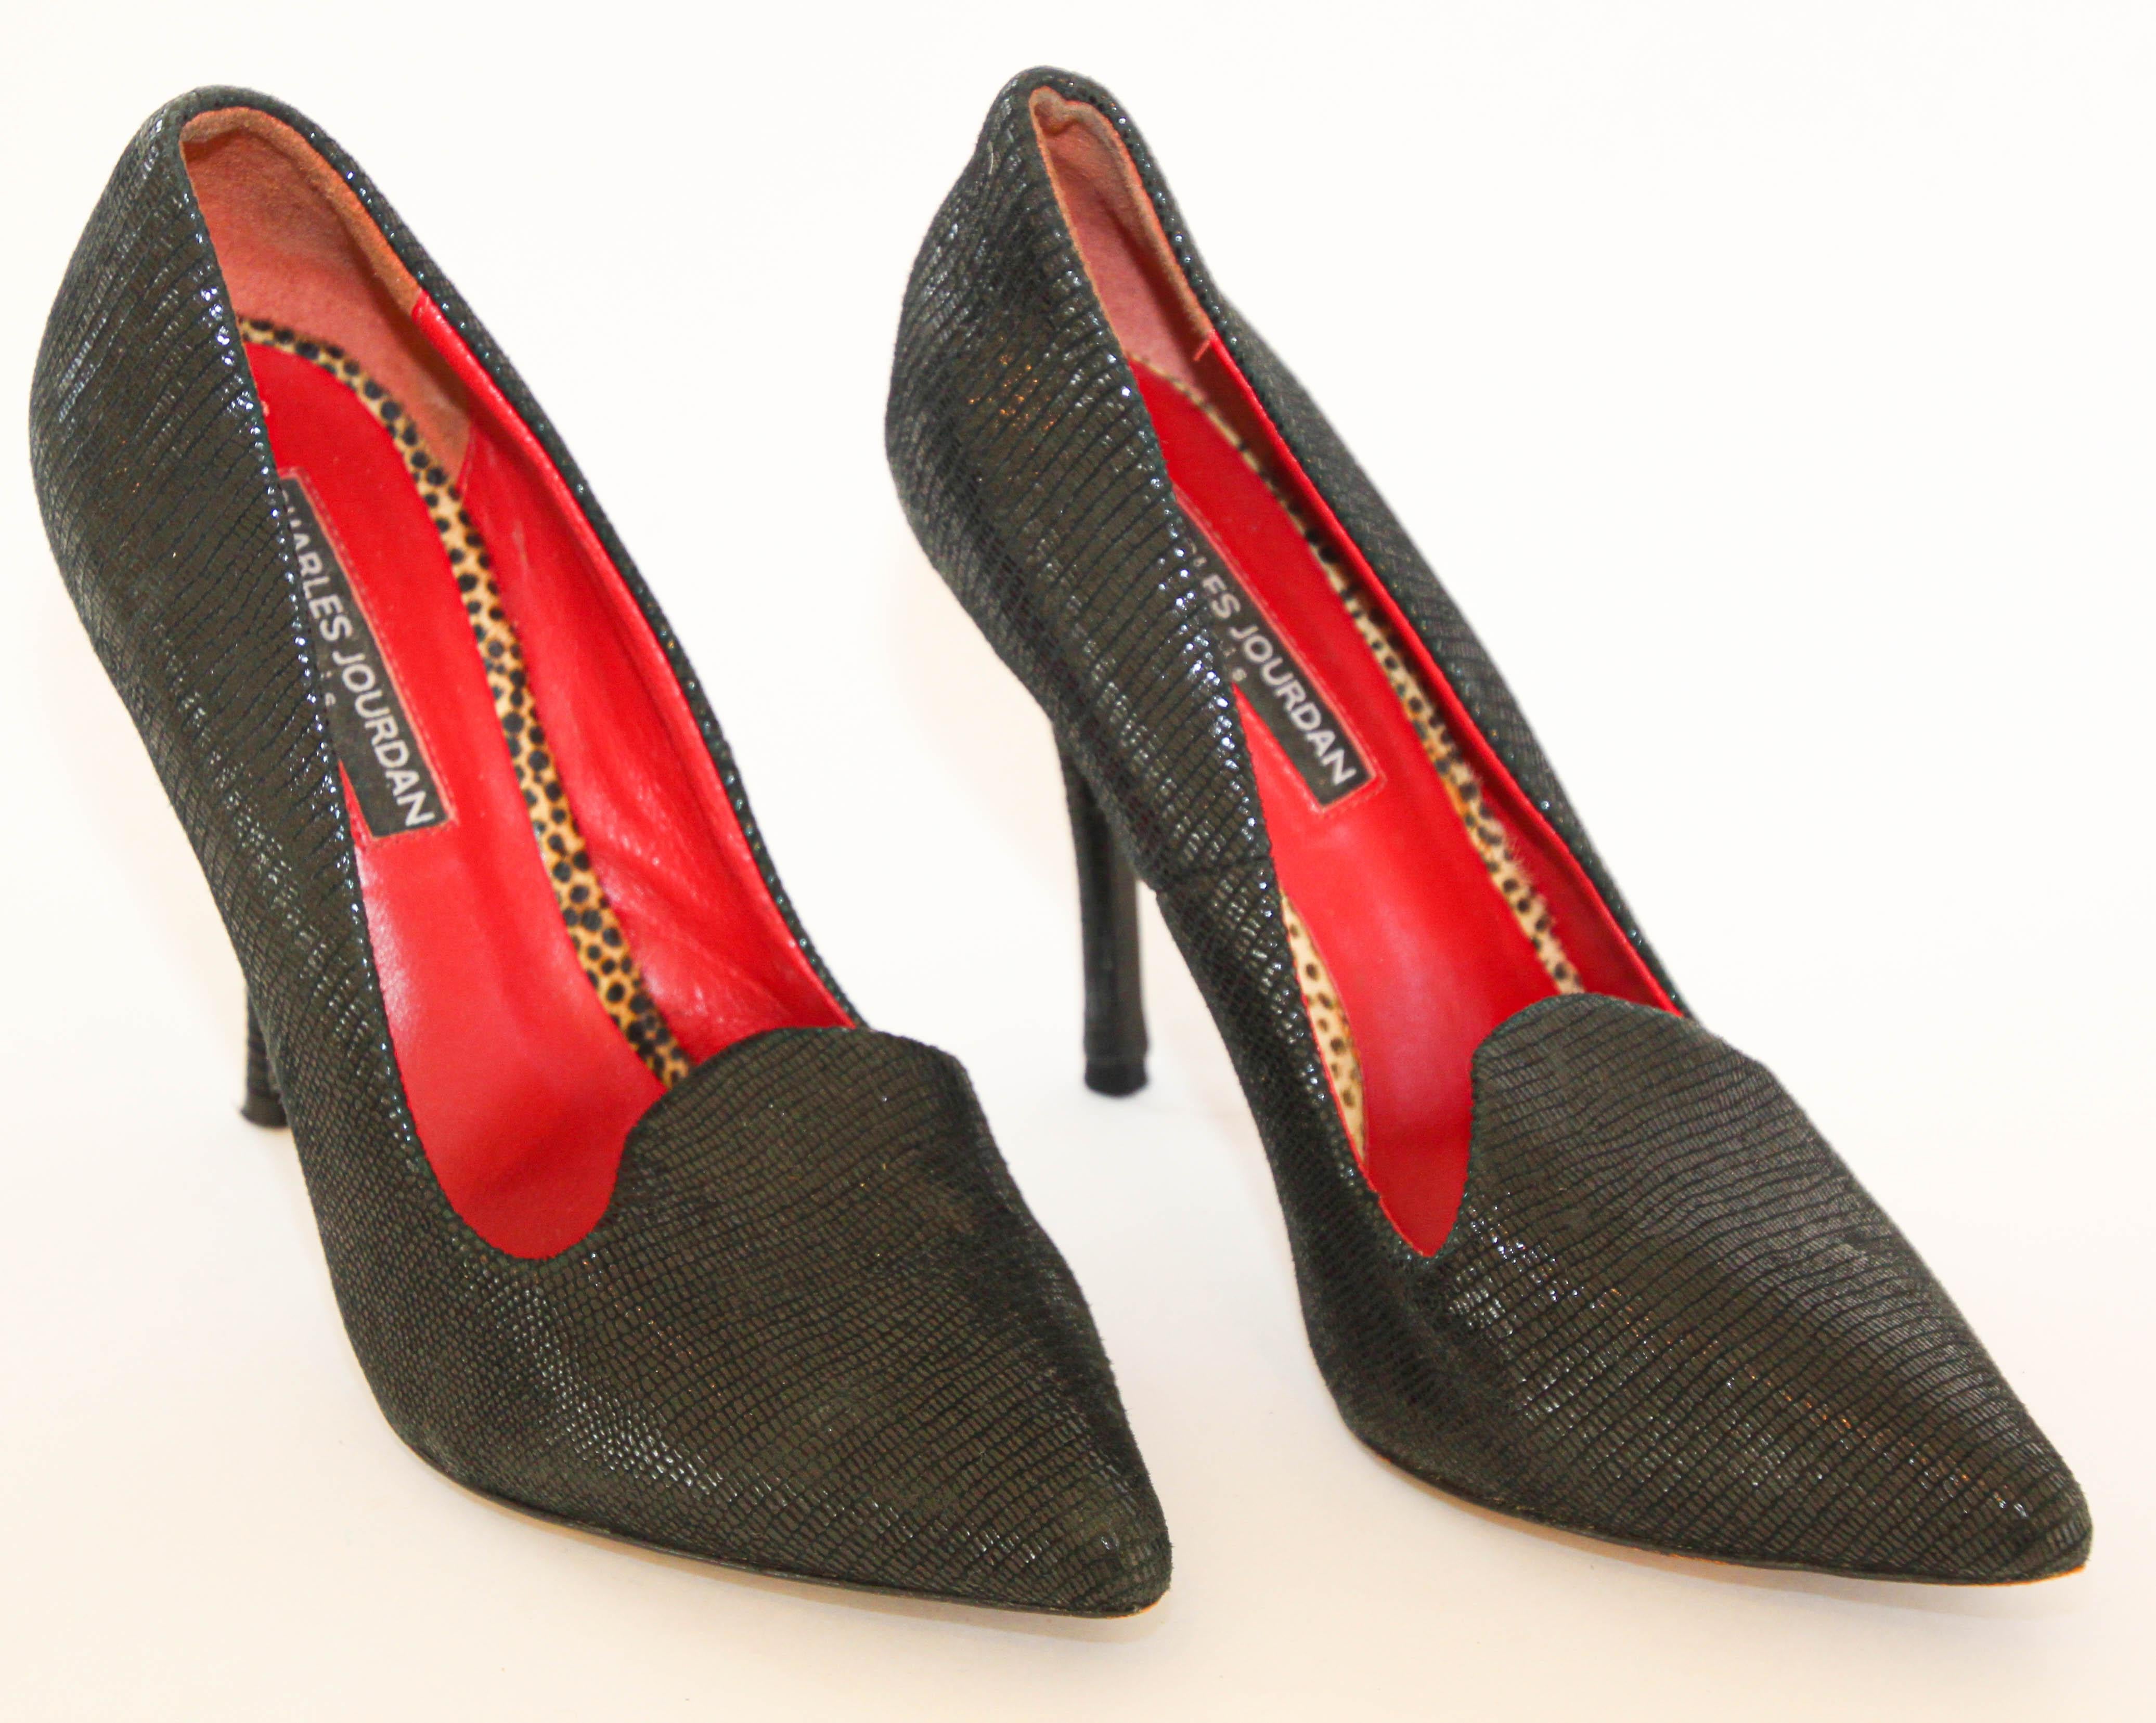 Charles Jourdan Paris Shoes Stiletto Heels Black Suede Snake Print 1990s.
Charles Jourdan Paris heels with red leather sole with leopard animal print accent inside.
French elegance, chic to wear everyday or for a party.
Size: Size 6 M.
Heel Height: